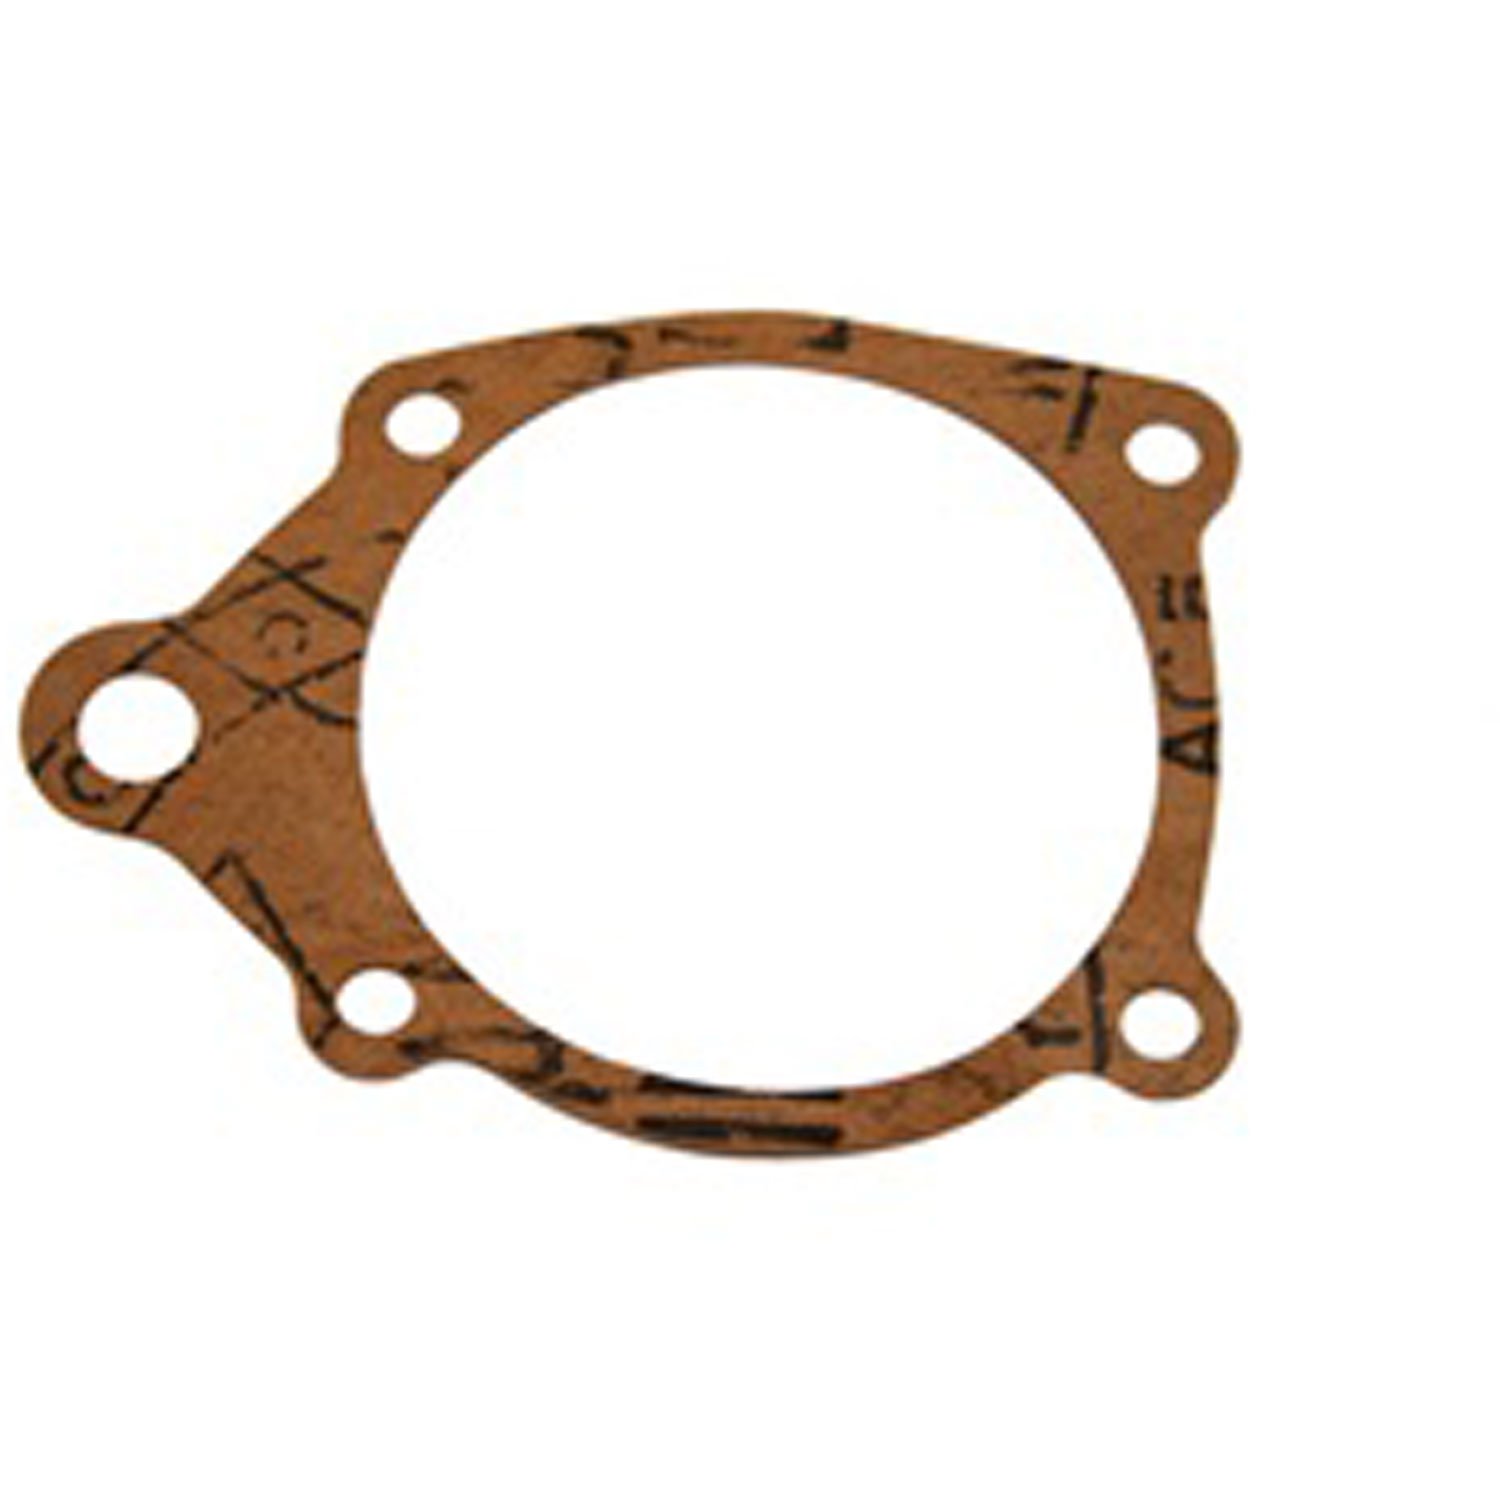 This water pump gasket from Omix-ADA fits 81-86 Jeep CJs 87-99 Wrangler YJ 87-99 XJ Cherokees and 93-98 Jeep Grand Cherokee ZJ .